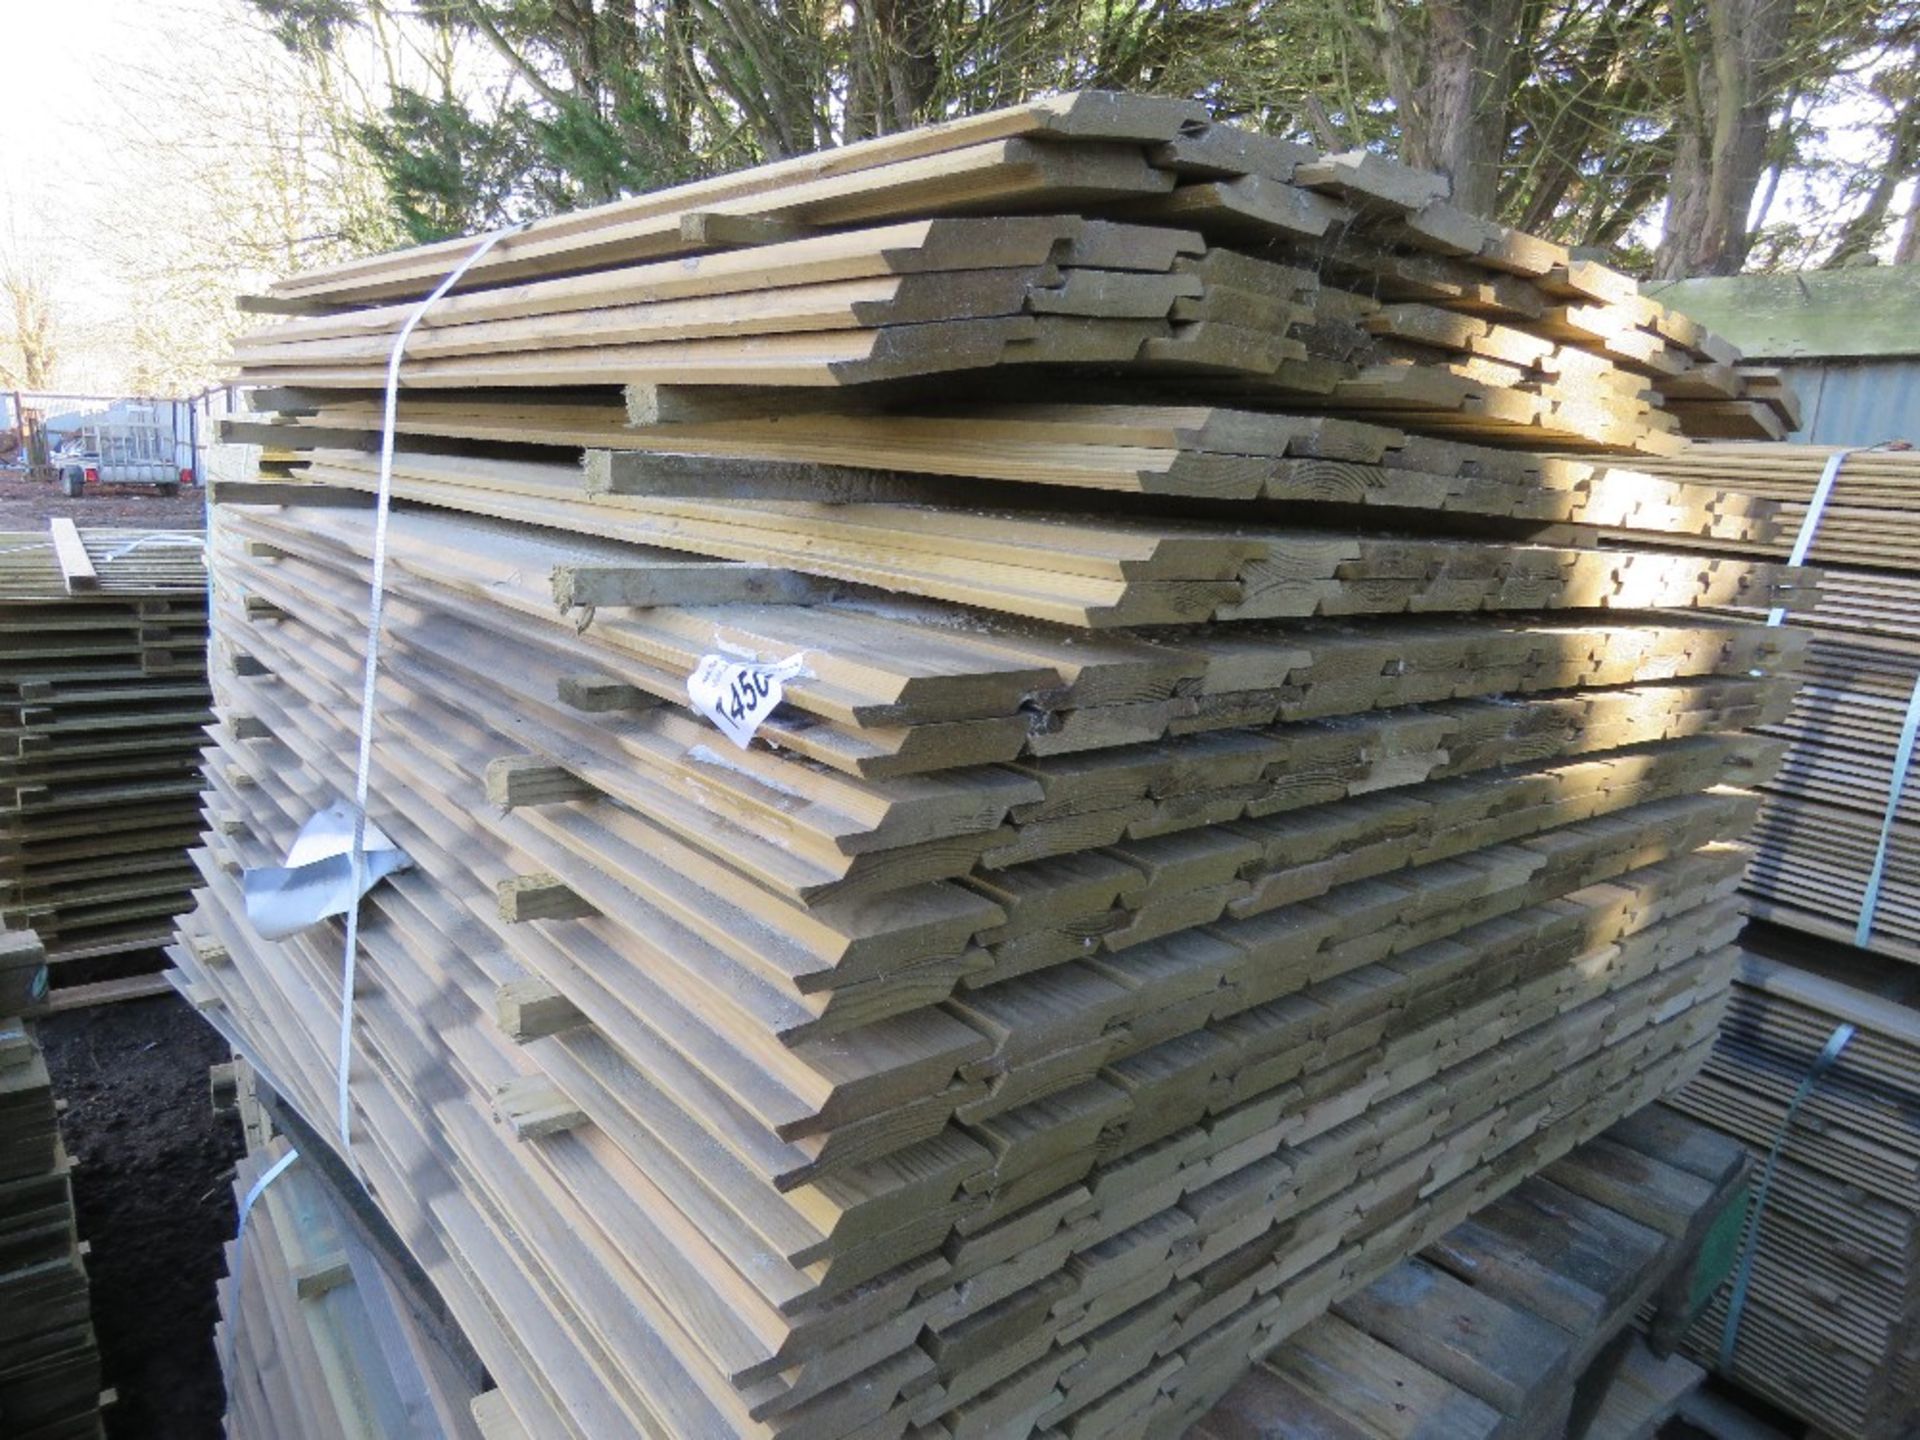 2 X PALLETS OF SHIPLAP PRESSURE TREATED FENCE CLADDING TIMBER BOARDS. 1.M-1.05M LENGTH X 95MM WIDTH - Image 2 of 4